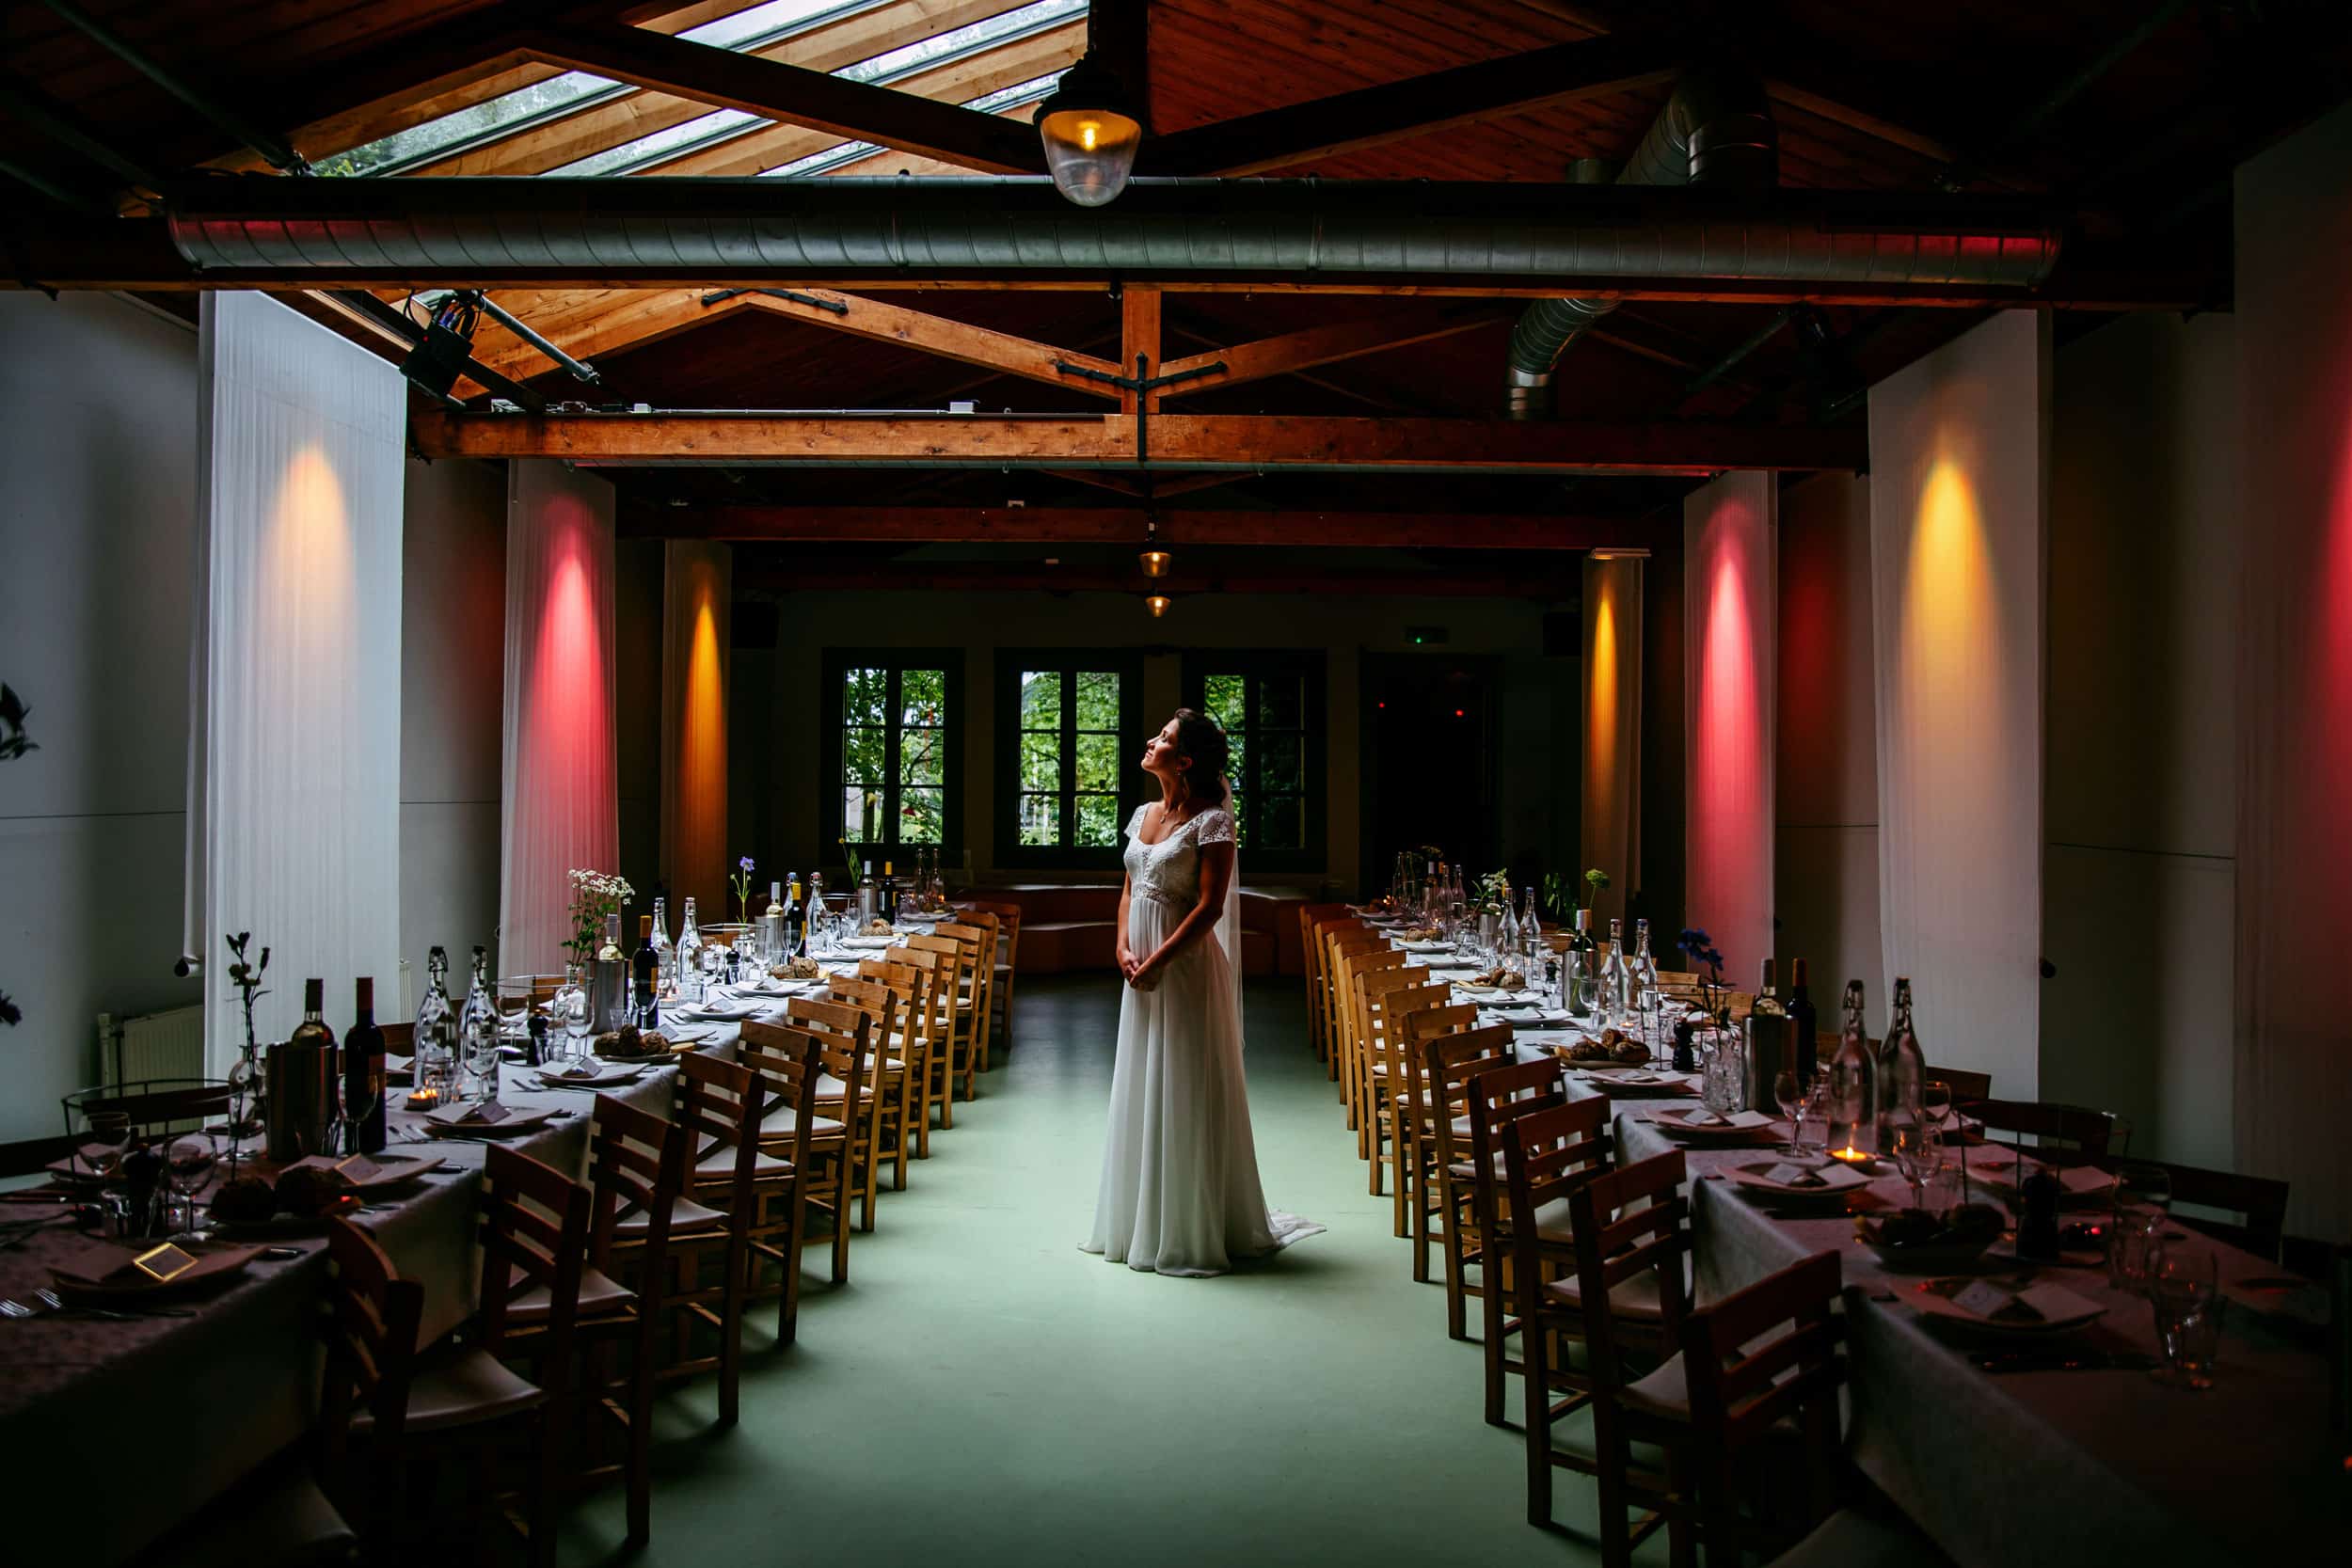 A bride in a white dress standing in The Empire of the Emperor, a dark room transformed into an enchanting wedding venue.